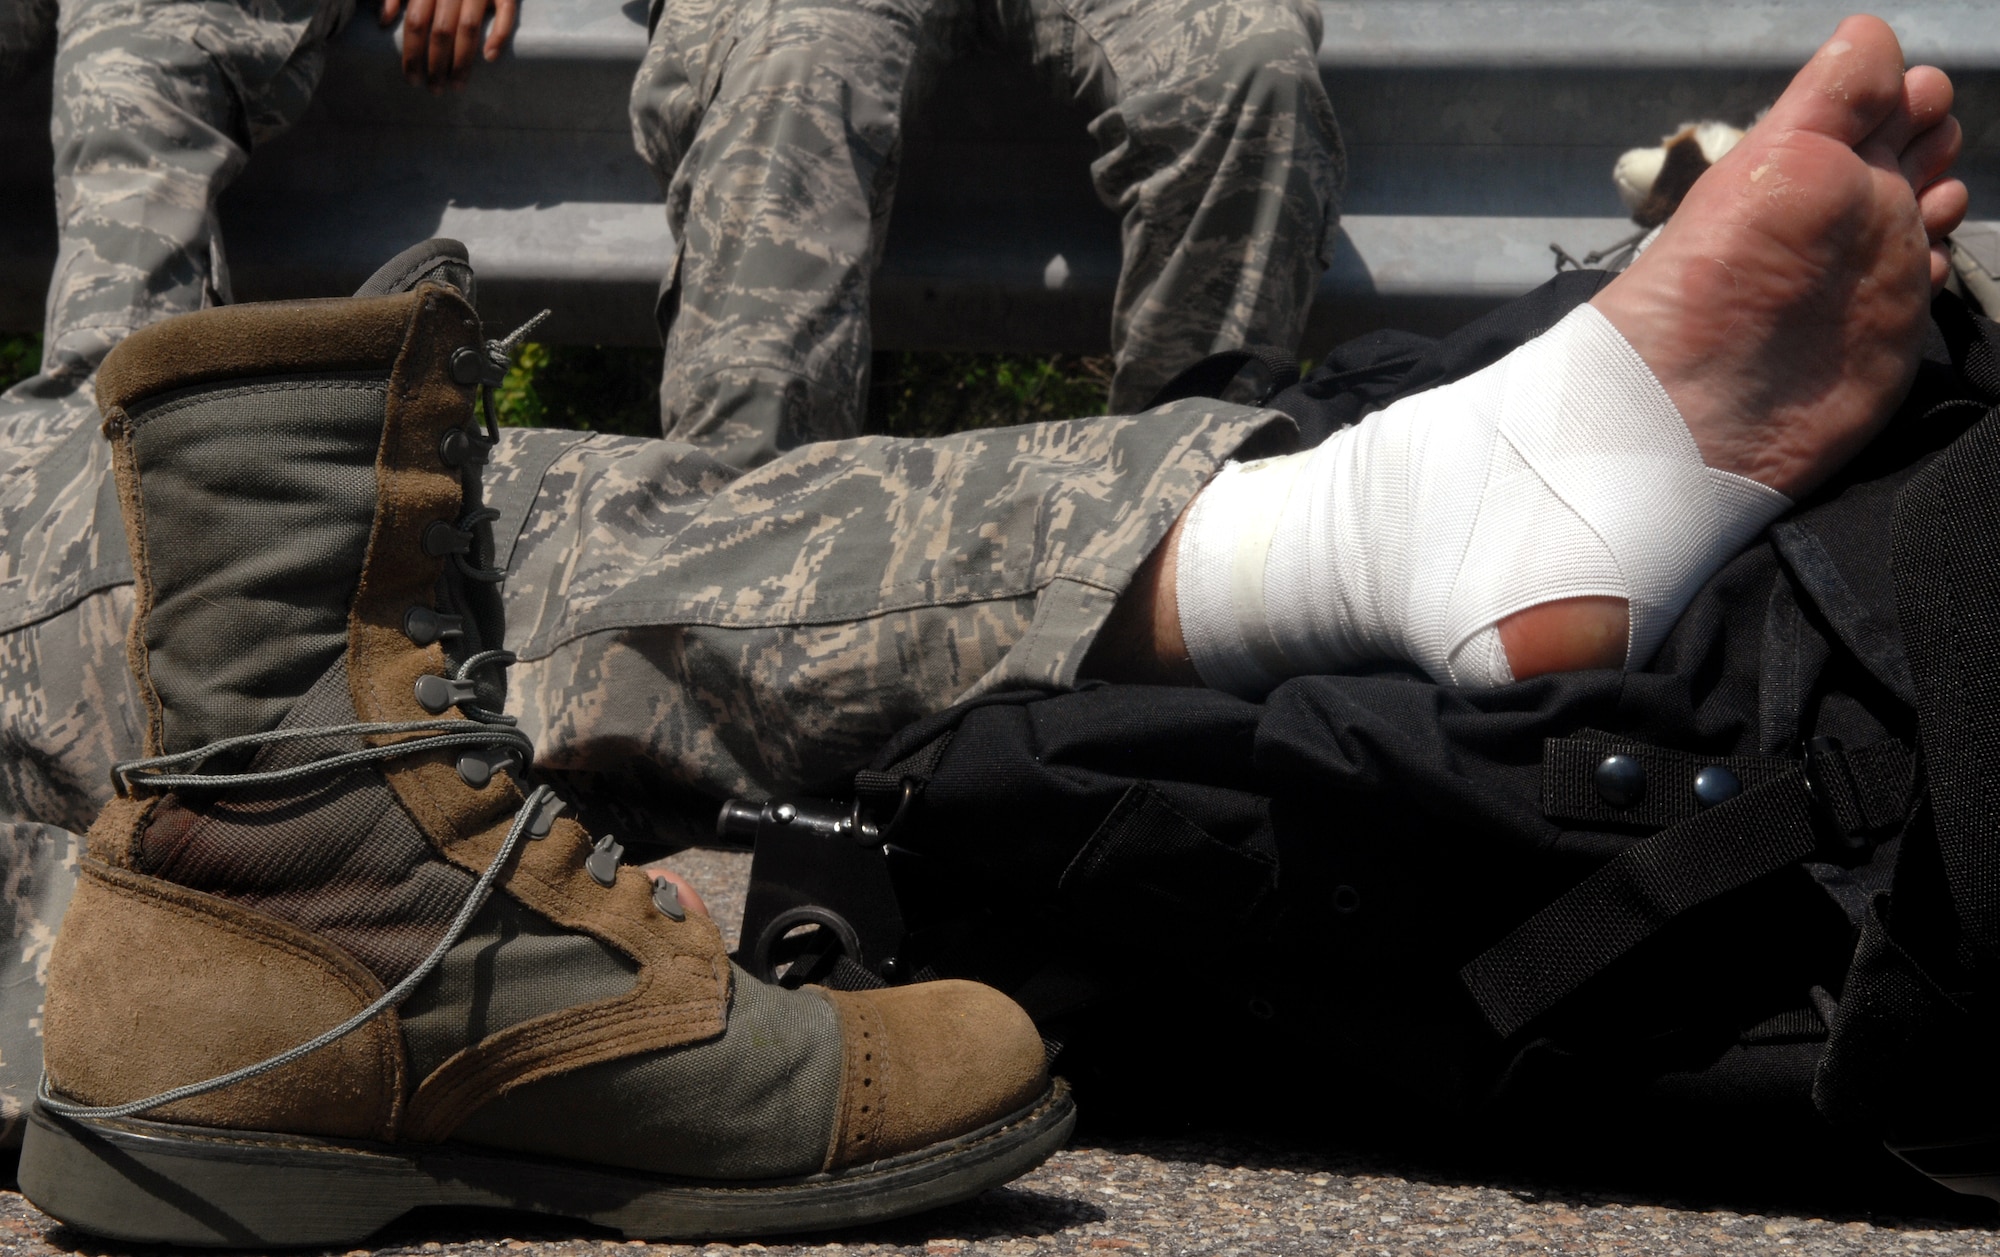 An Airman displays his newly bandaged foot after discovering his heels had been bleeding during the 16.6-mile Bataan Death March memorial walk at Chesapeake, Va., April 27, 2013. A number of walkers sustained minor injuries like sprained ankles, blisters and dehydration. The pain felt by participants was intentional so they could feel a fraction of the abuse veterans of the original Bataan Death March endured. (U.S. Air Force photo by Senior Airman Teresa Aber/Released)